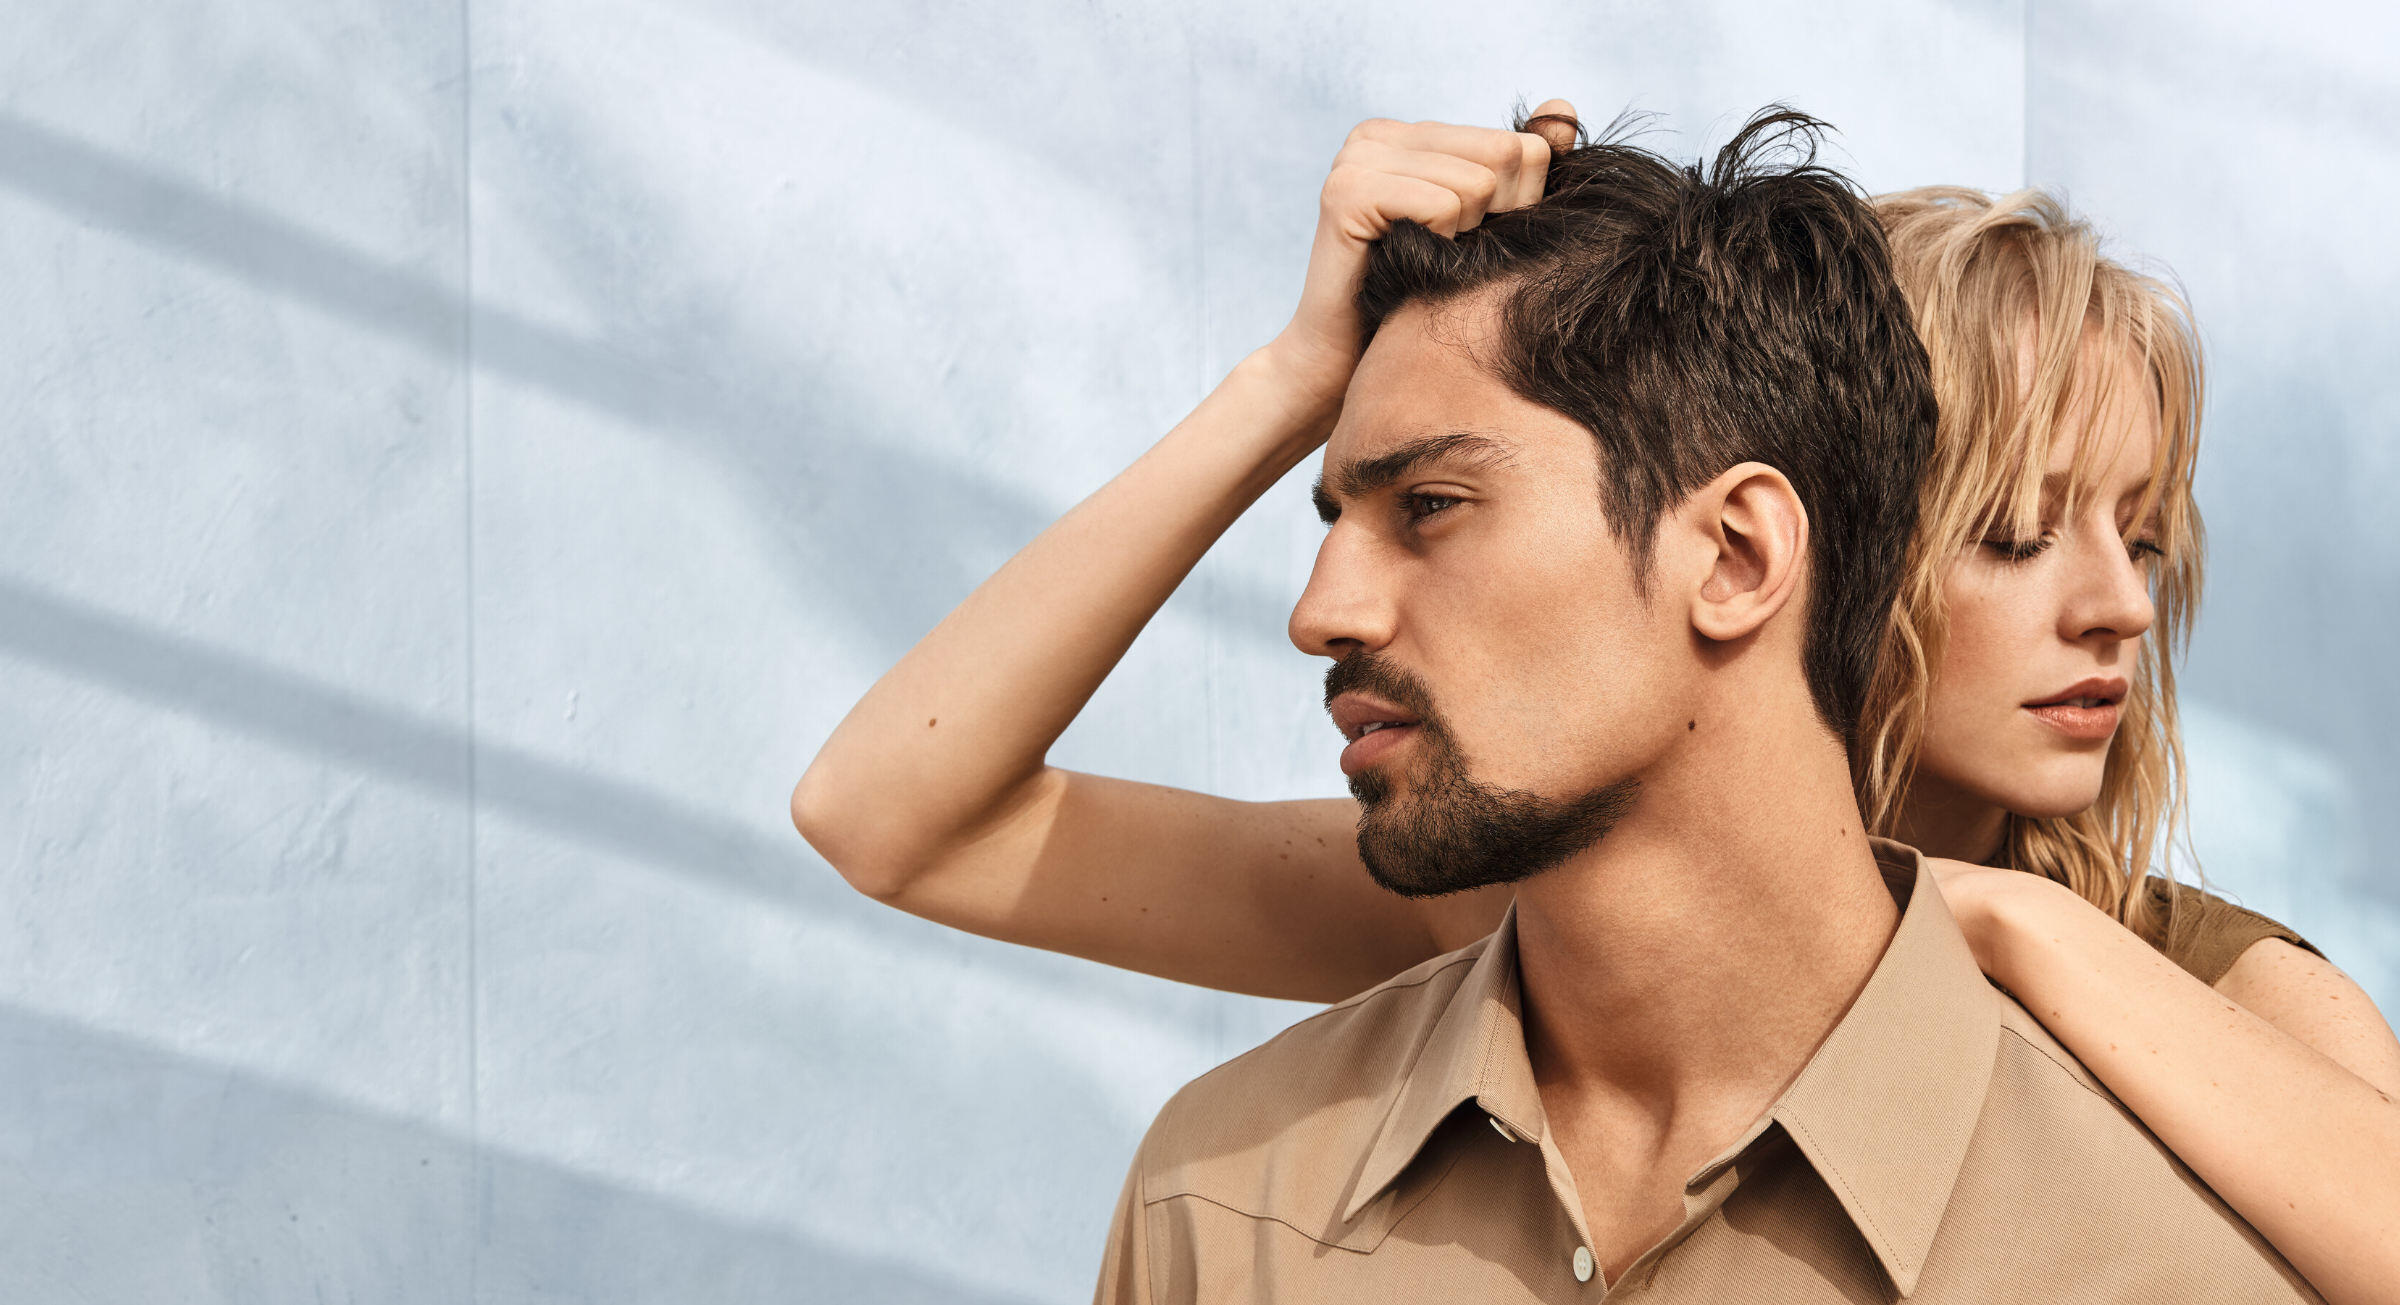 Effective Thinning Hair & Scalp Solutions | NIOXIN